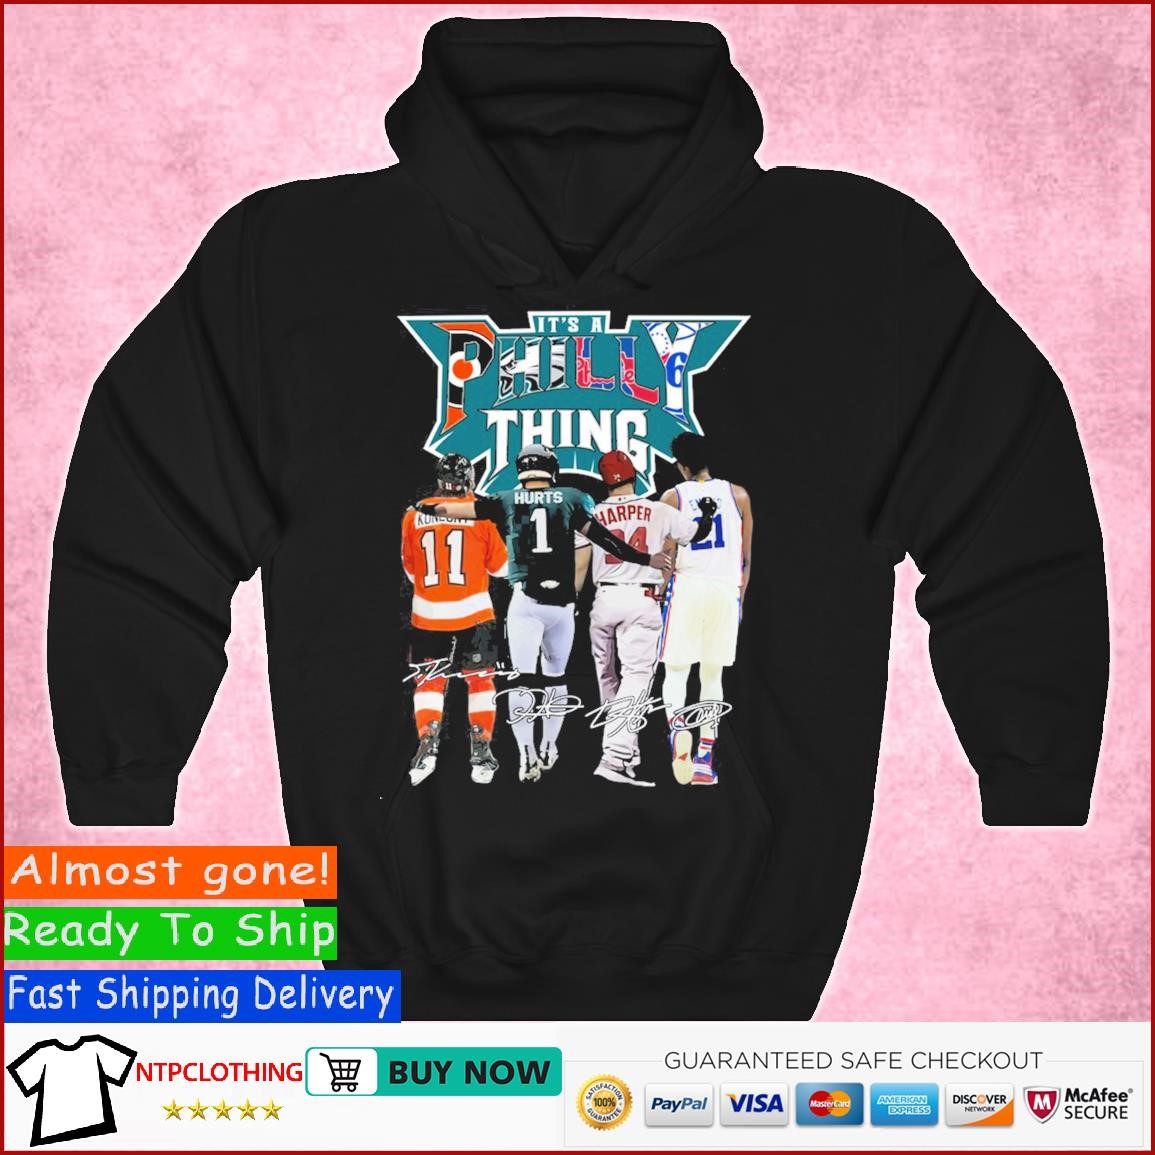 Official it's A Philly Thing shirt, hoodie, sweatshirt for men and women